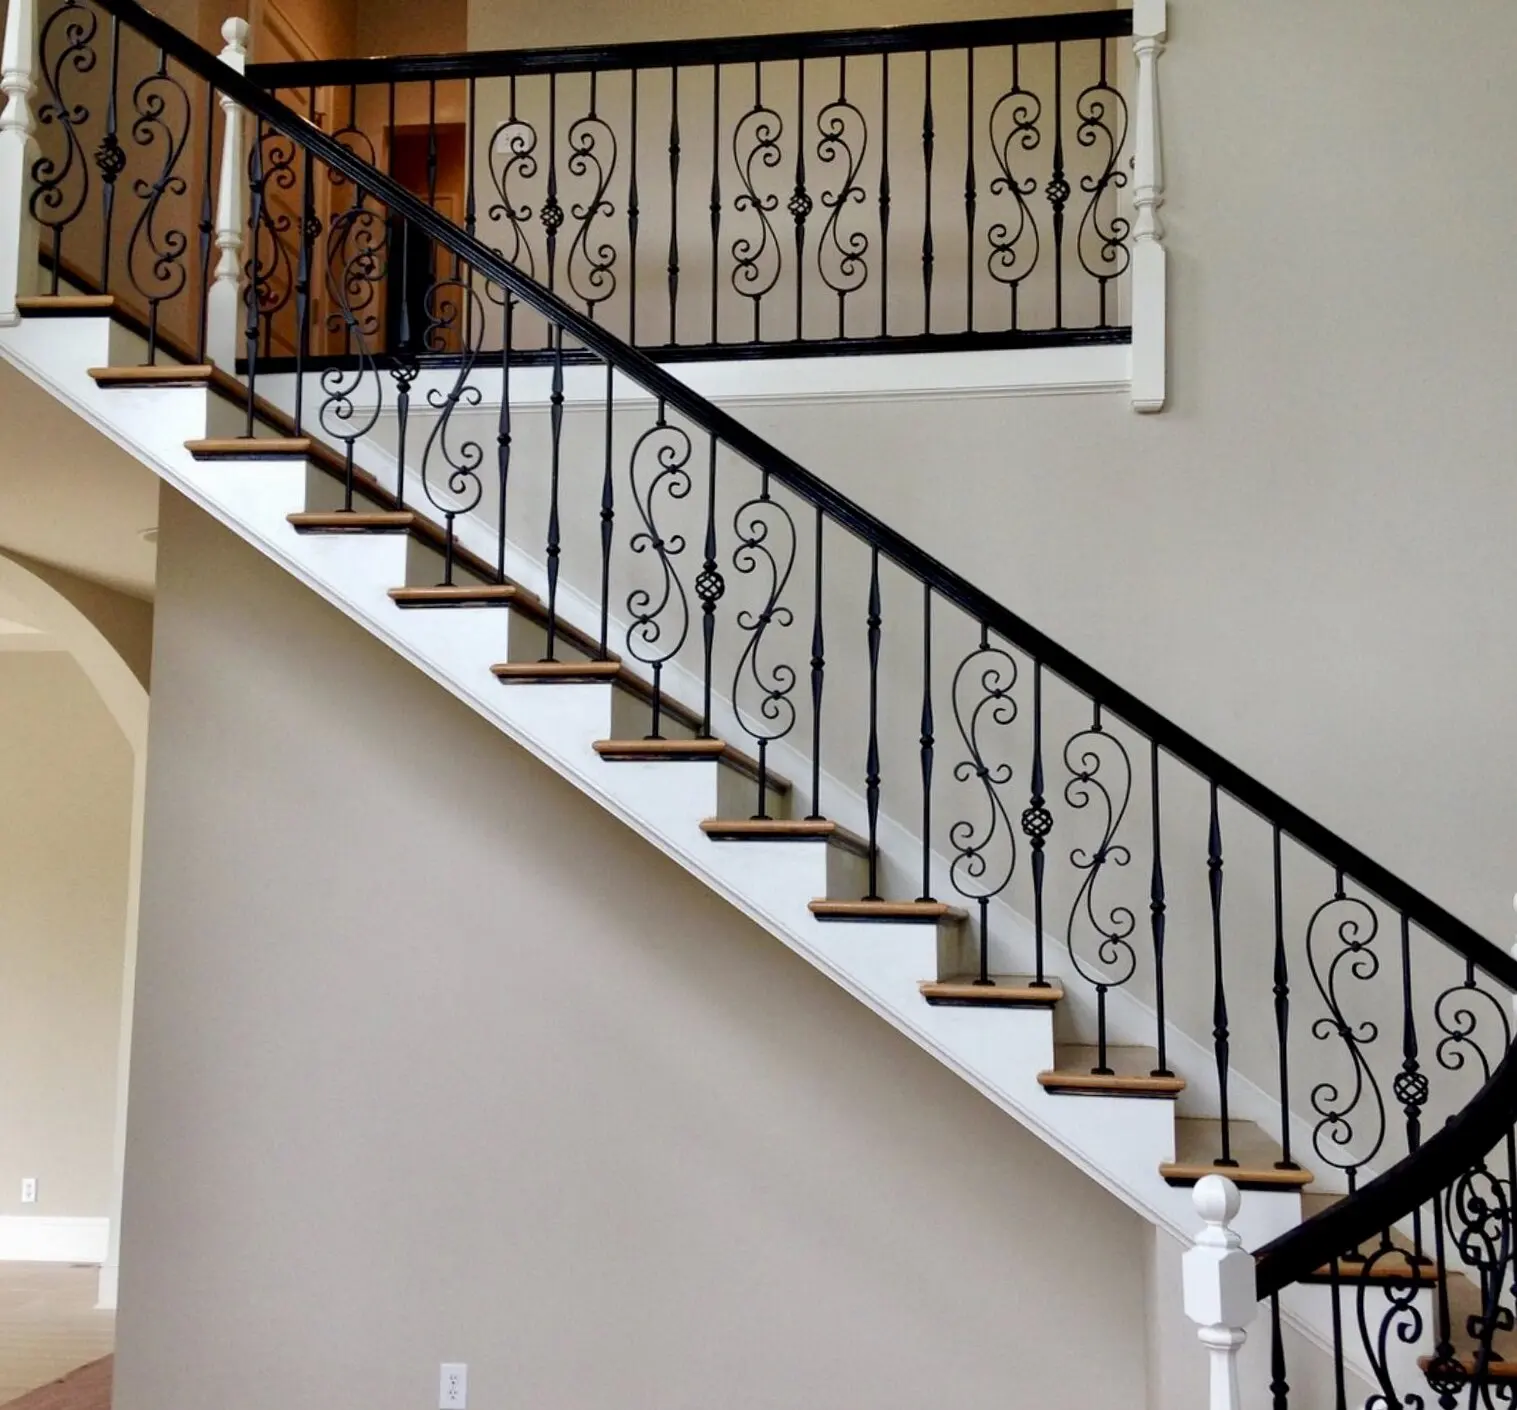 Outdoor Wrought Iron Railings For Indoor Metal Balustrades Design Terrace Glass Railing Stair Designs Buy Outdoor Wrought Iron Railings Indoor Metal Balustrades Design Terrace Glass Railing Stair Designs Product On Alibaba Com